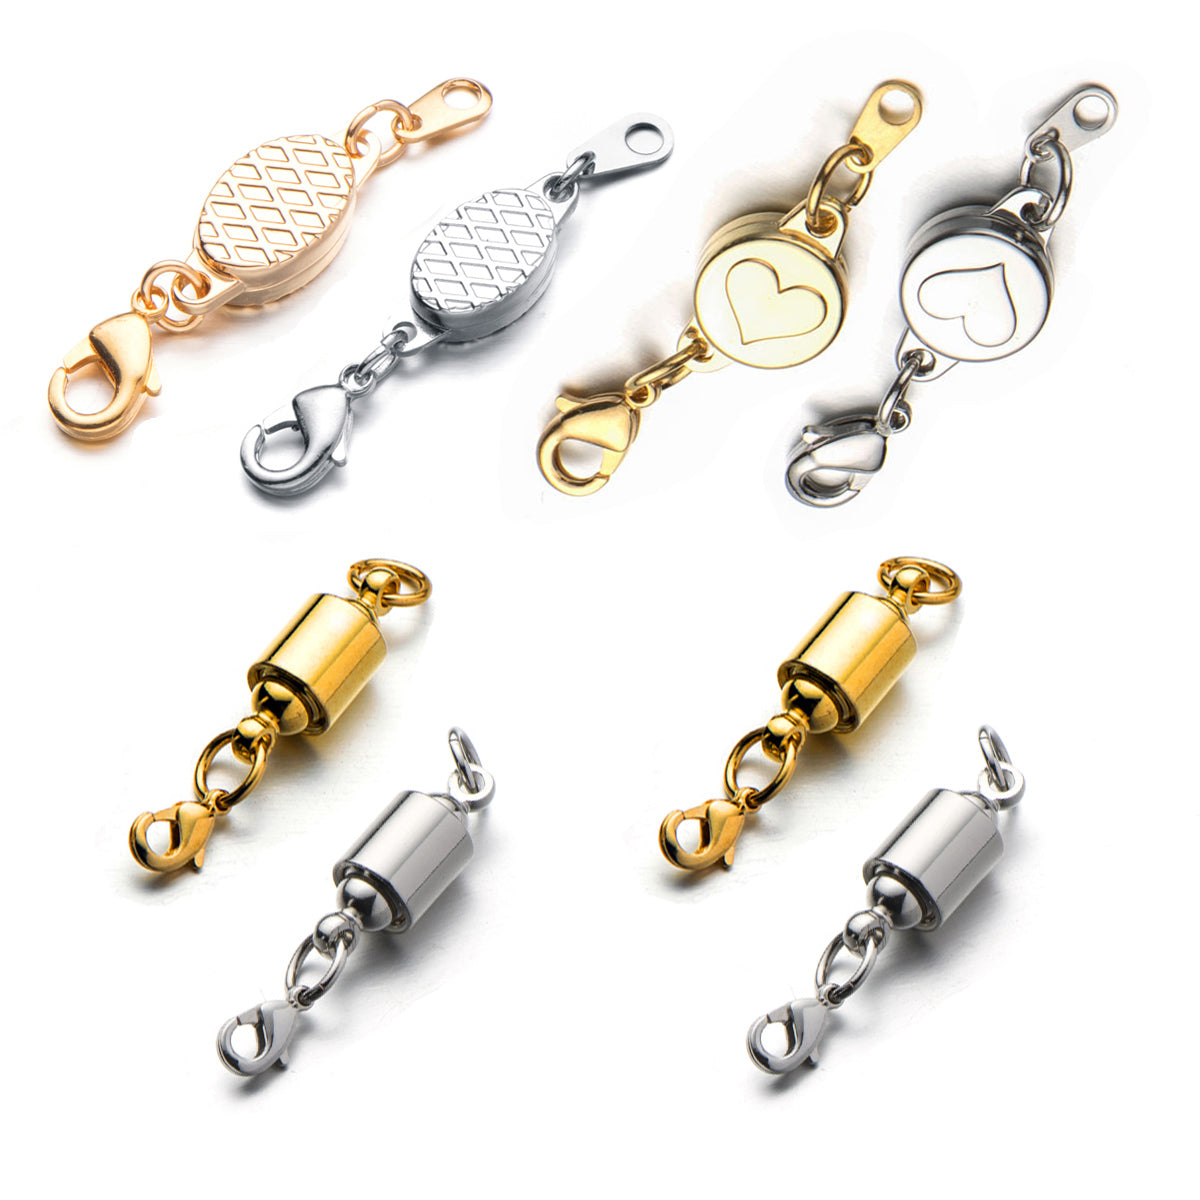 /blogs/news/magnetic-clasps-for-jewelry-convenient-and-perfect-for-those-with-limited-dexterity-or-long-nails